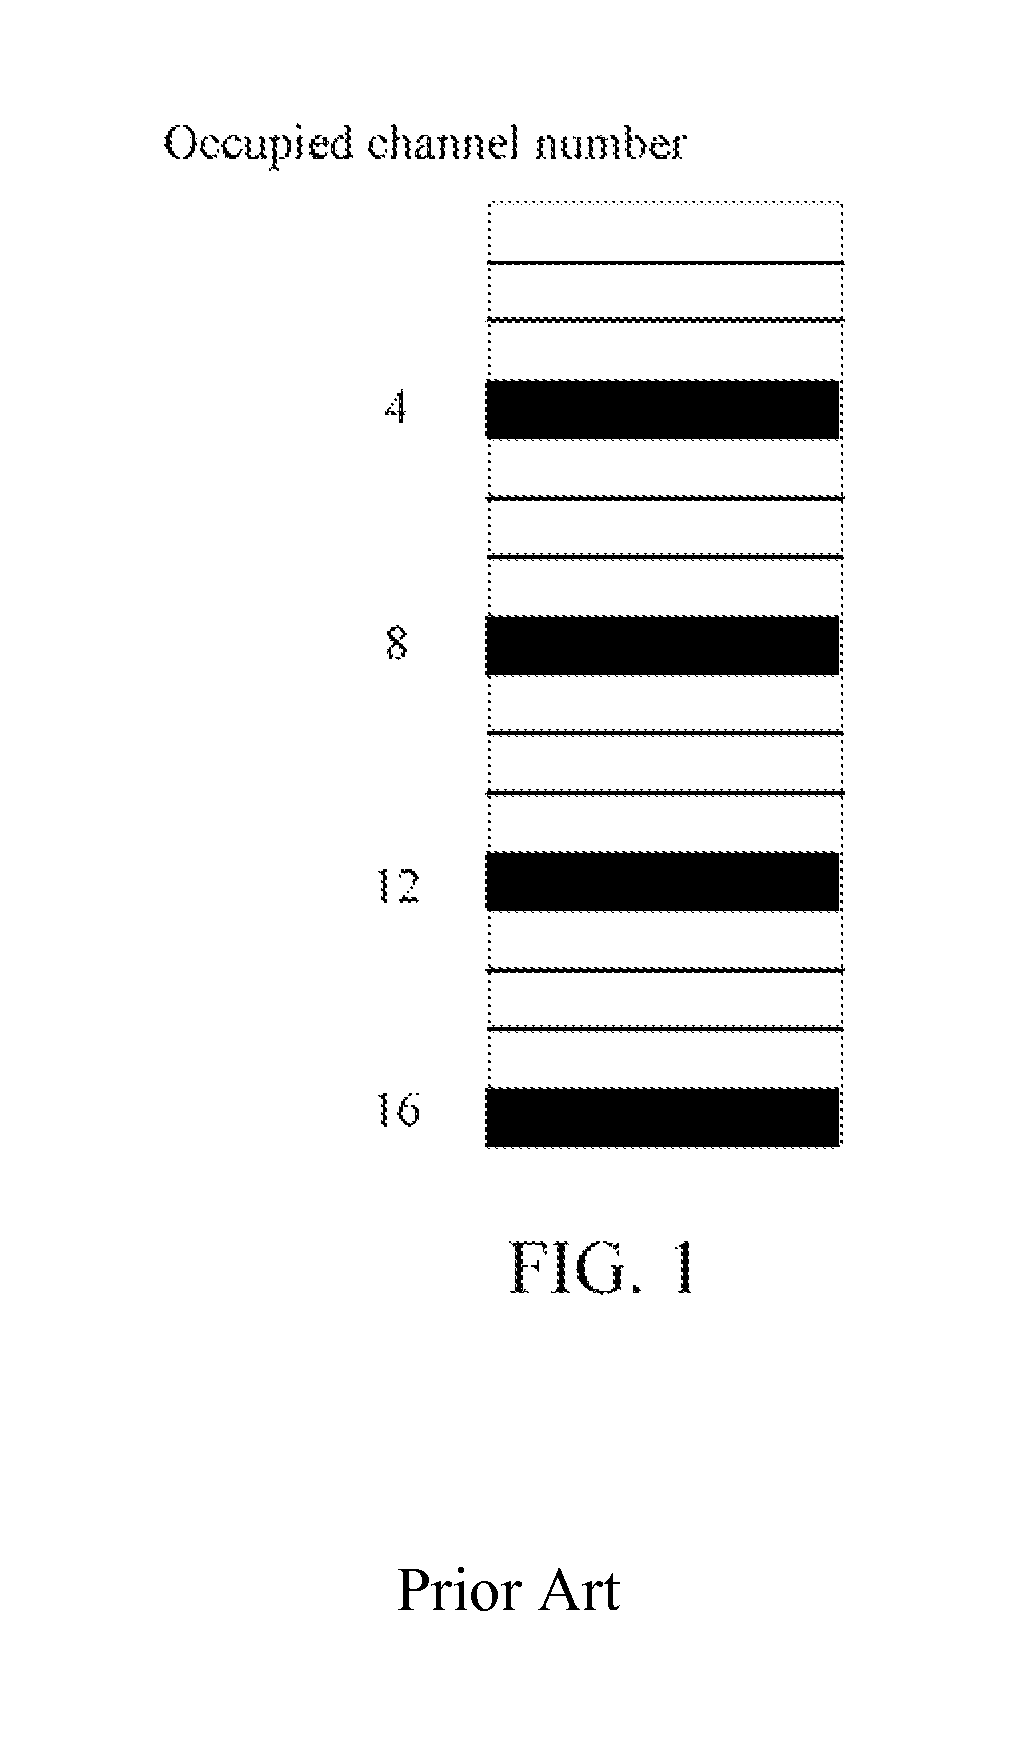 Method and system for arranging link resource fragments